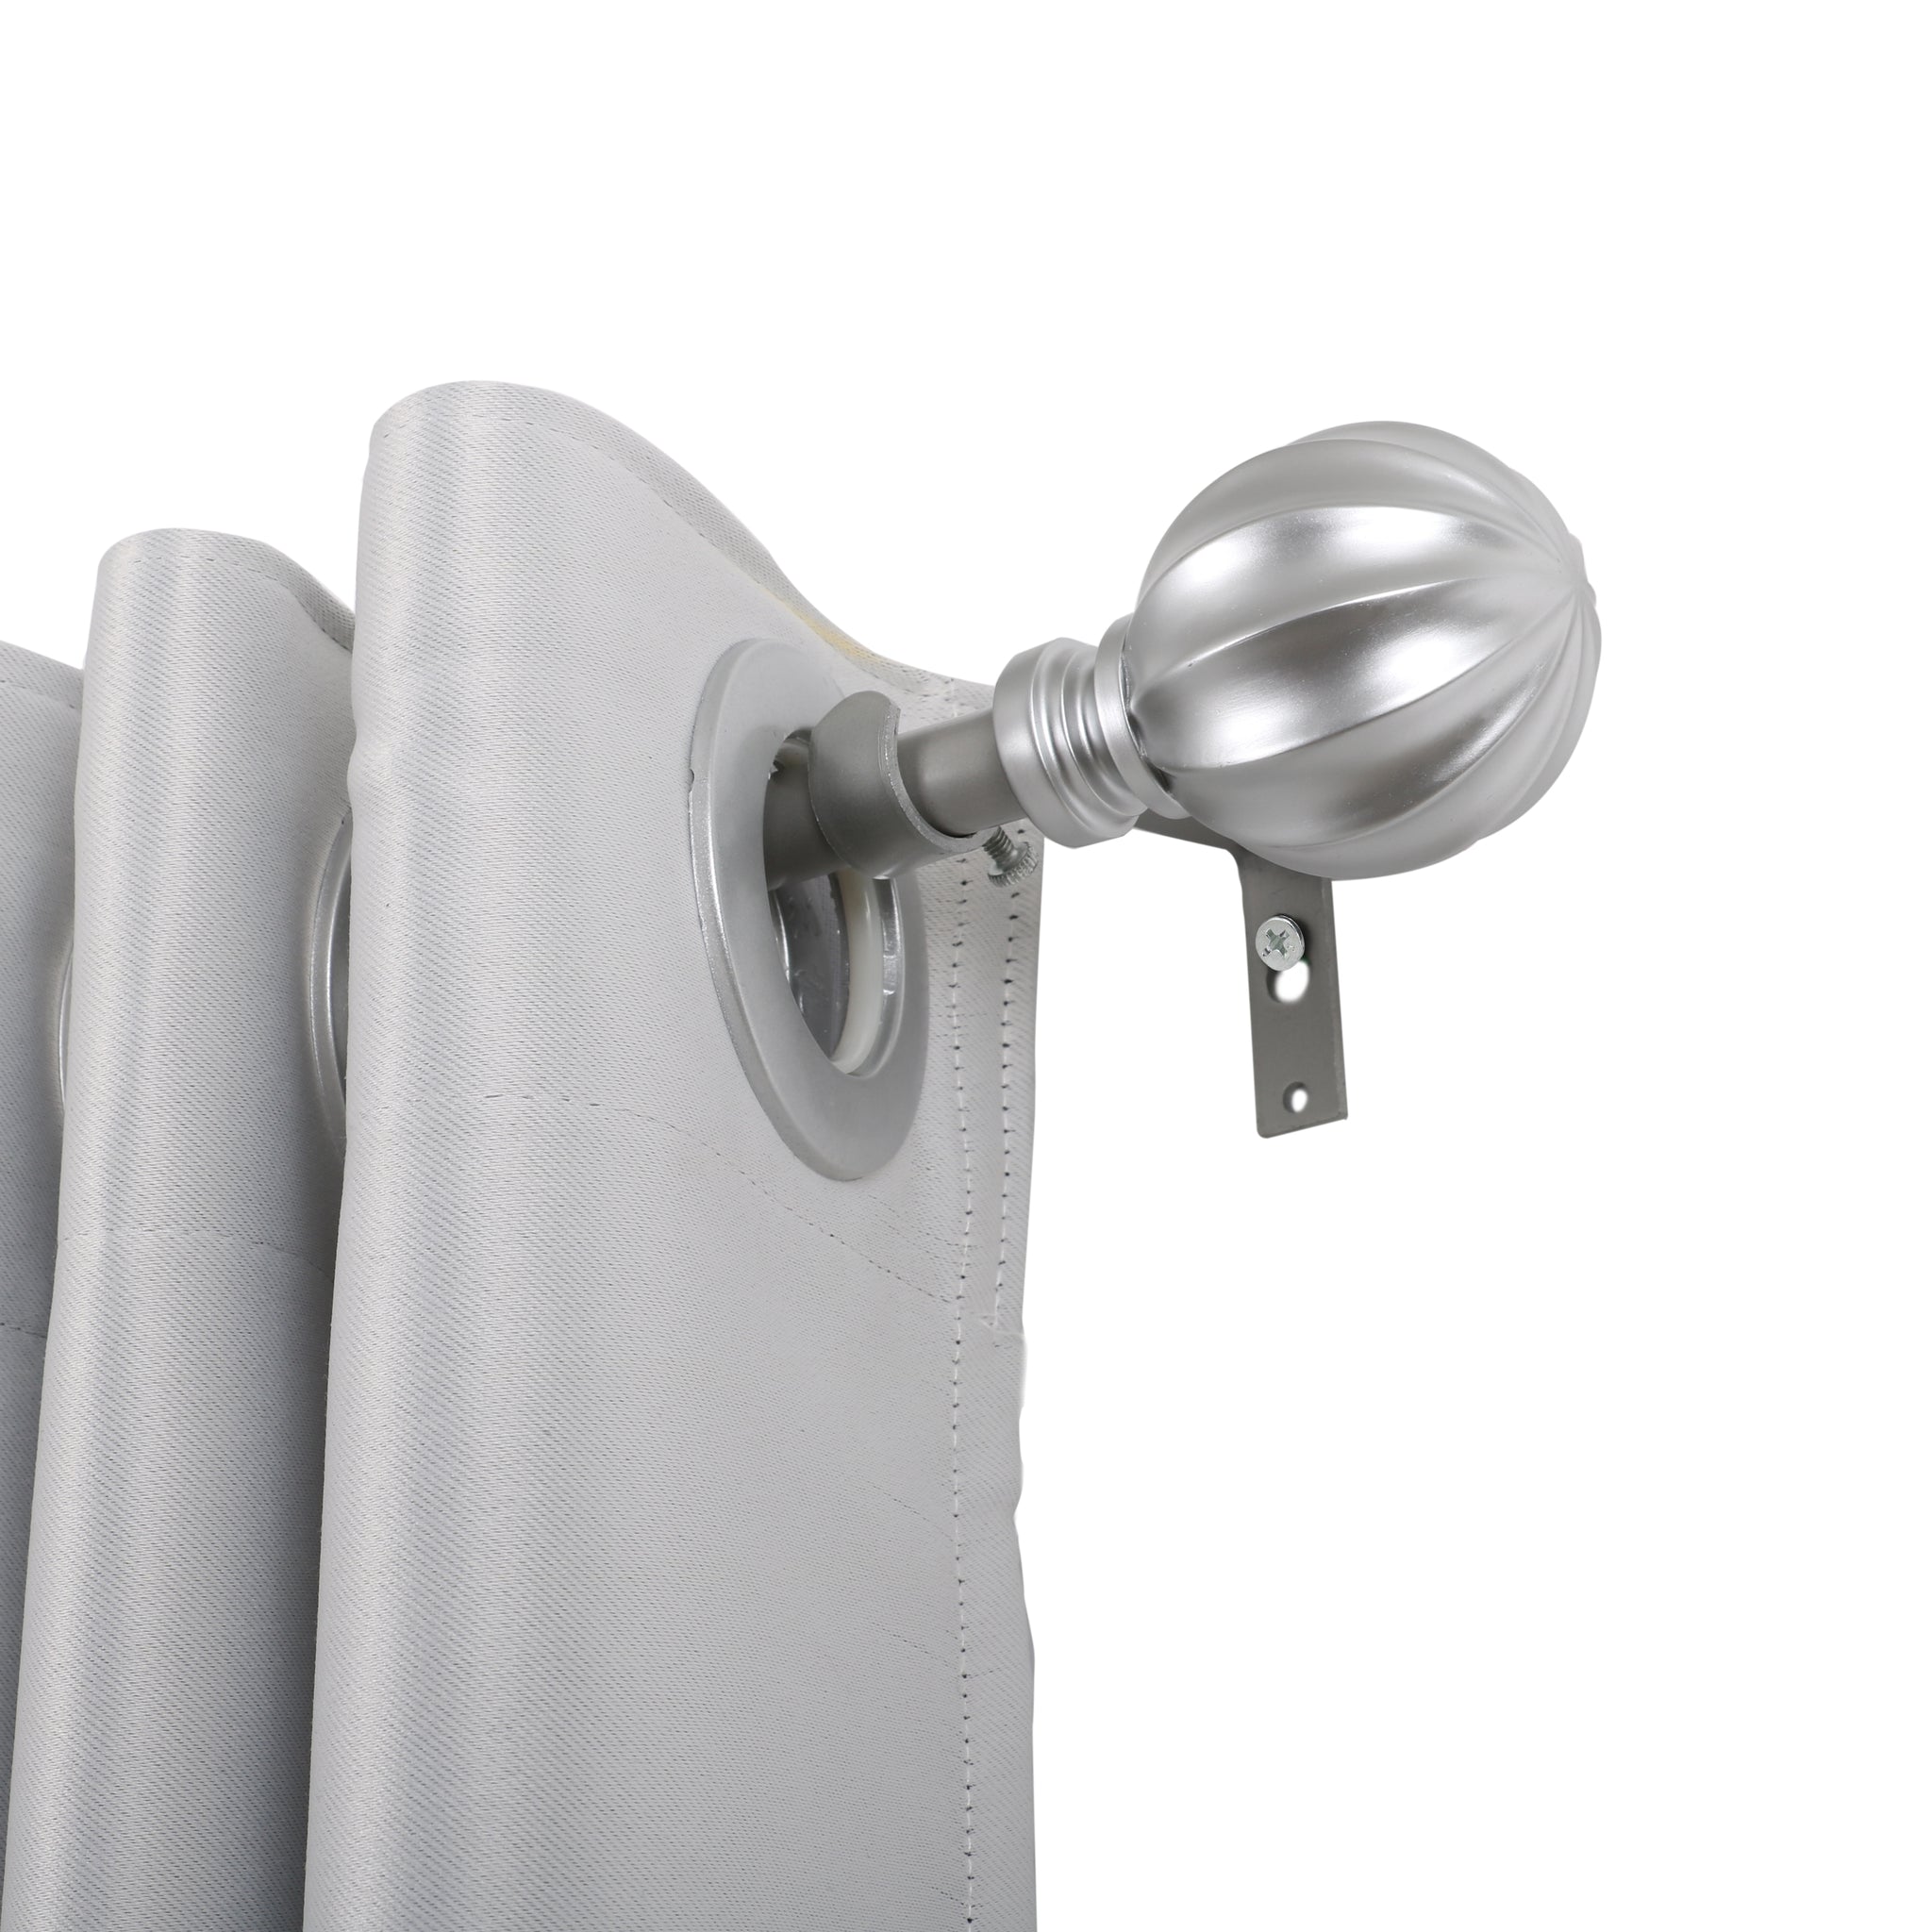 Utopia Alley D54N Curtain Rod with Decorative Ball Finial, 48-86", Nickel